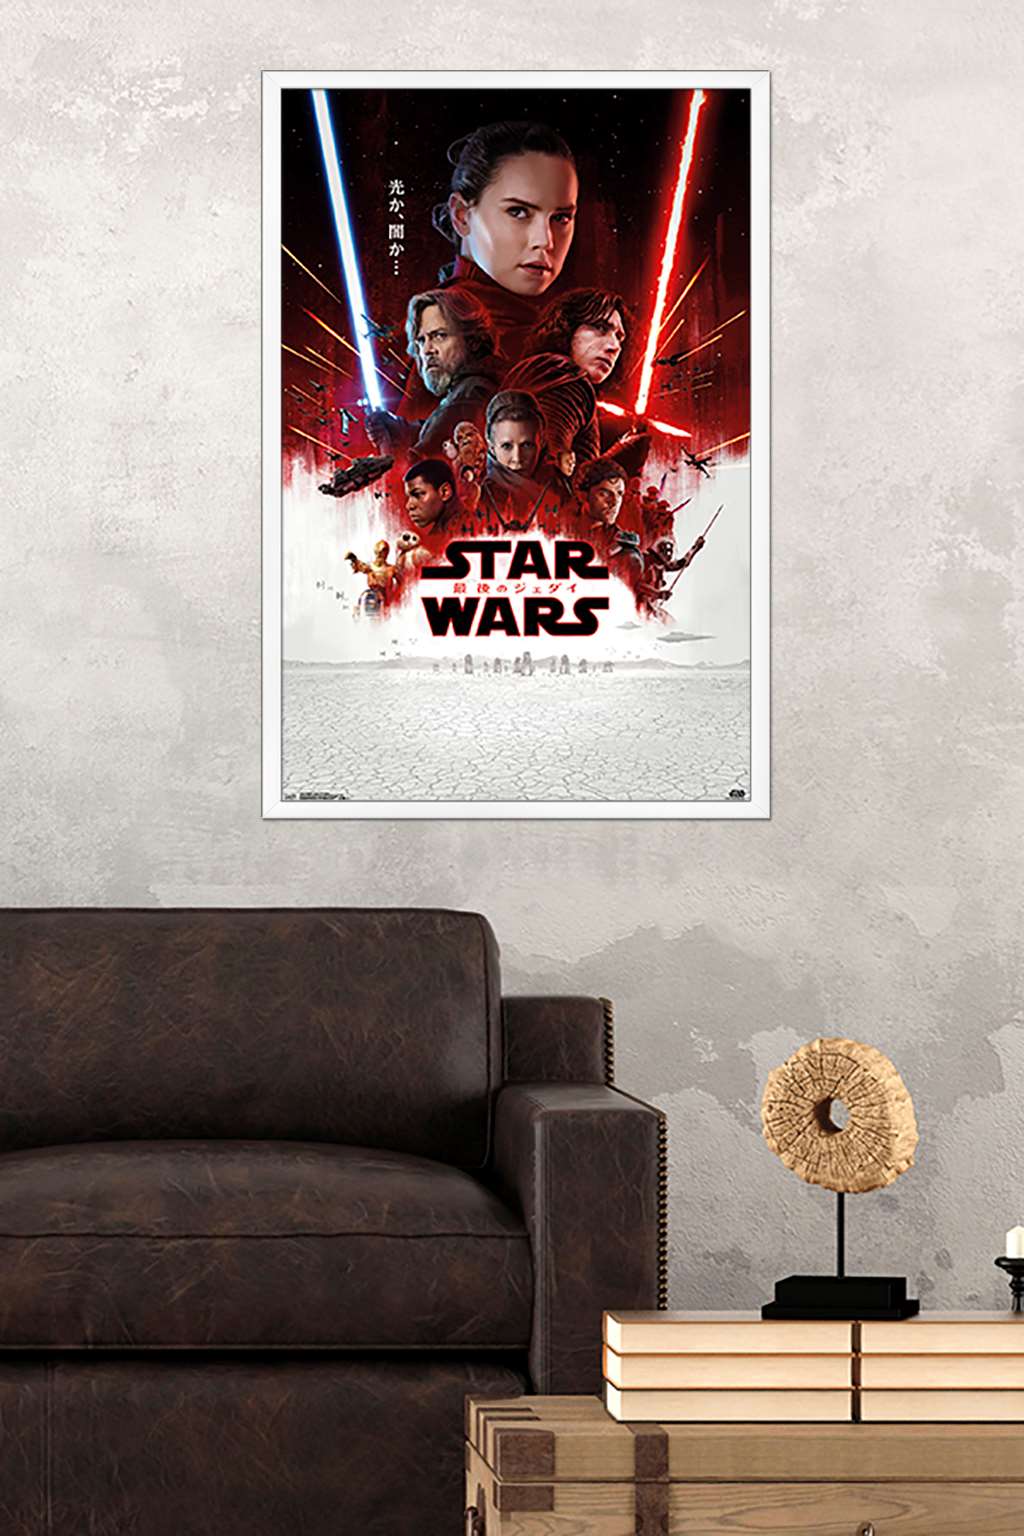 Star Wars: The Last Jedi - Japan One Sheet Wall Poster, 22.375" x 34", Framed - image 2 of 2